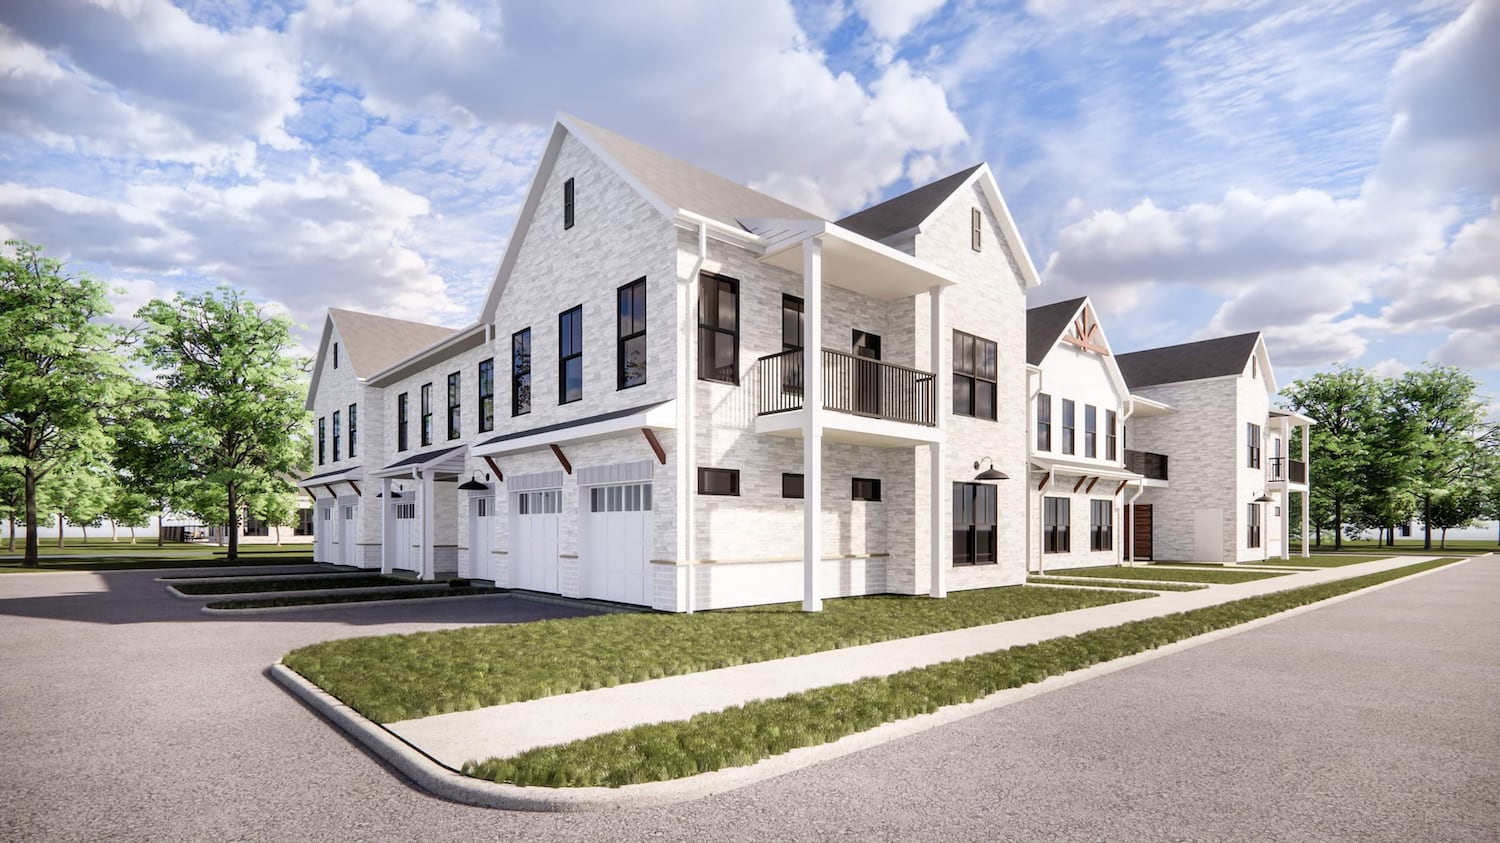 The townhome-style rental community will include 22 apartment buildings plus a clubhouse.